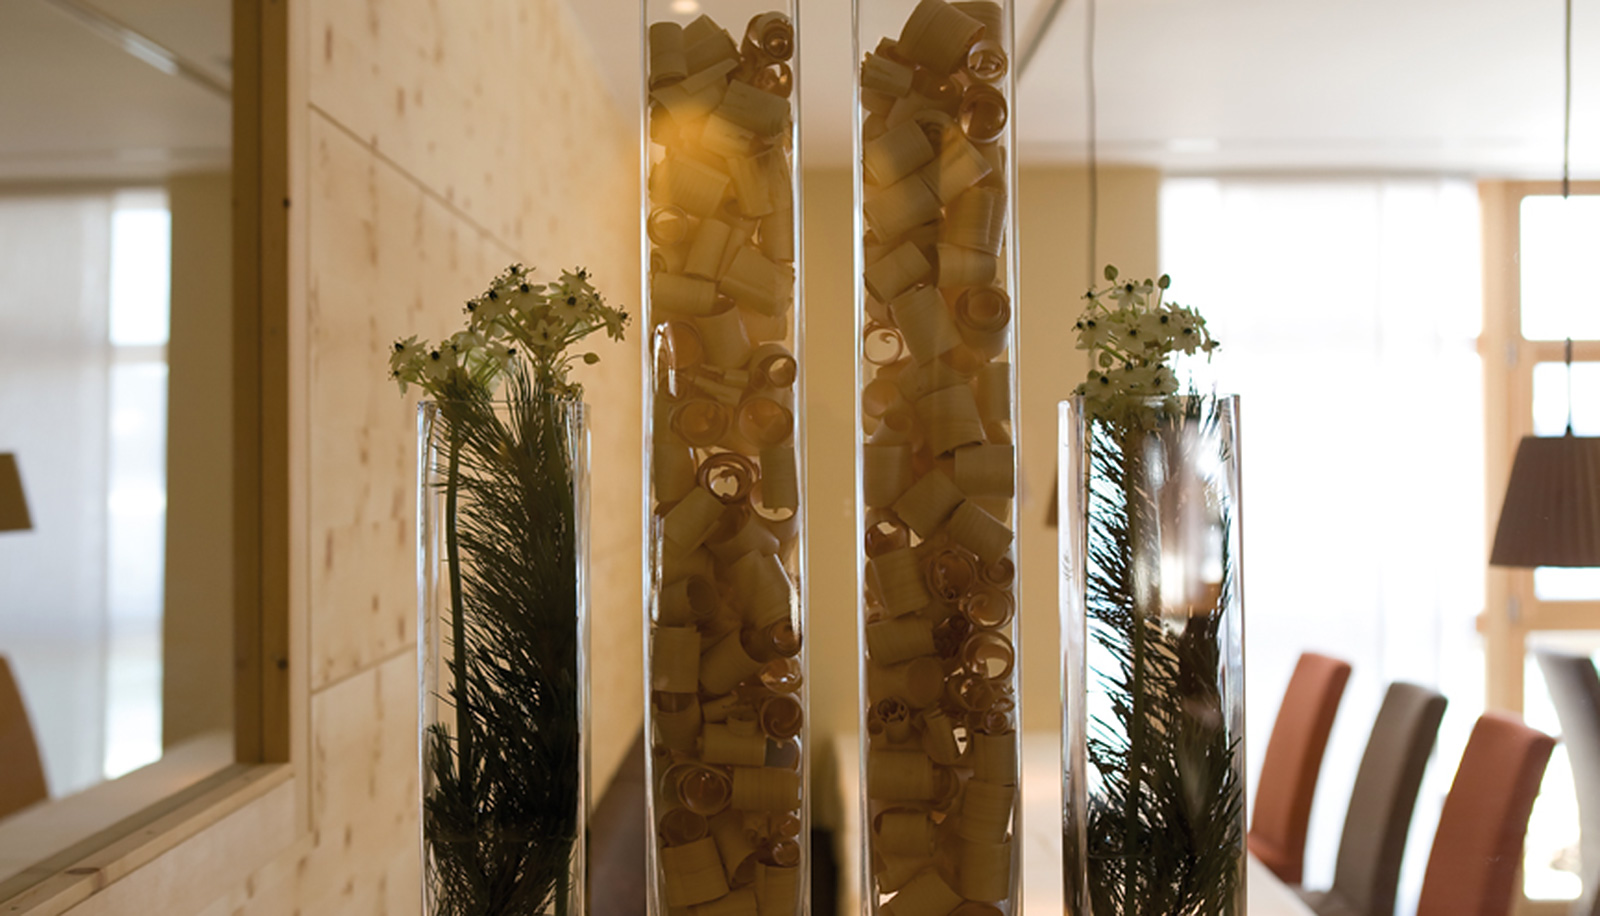 Decoration with woodchips and flowers in tall glass vases